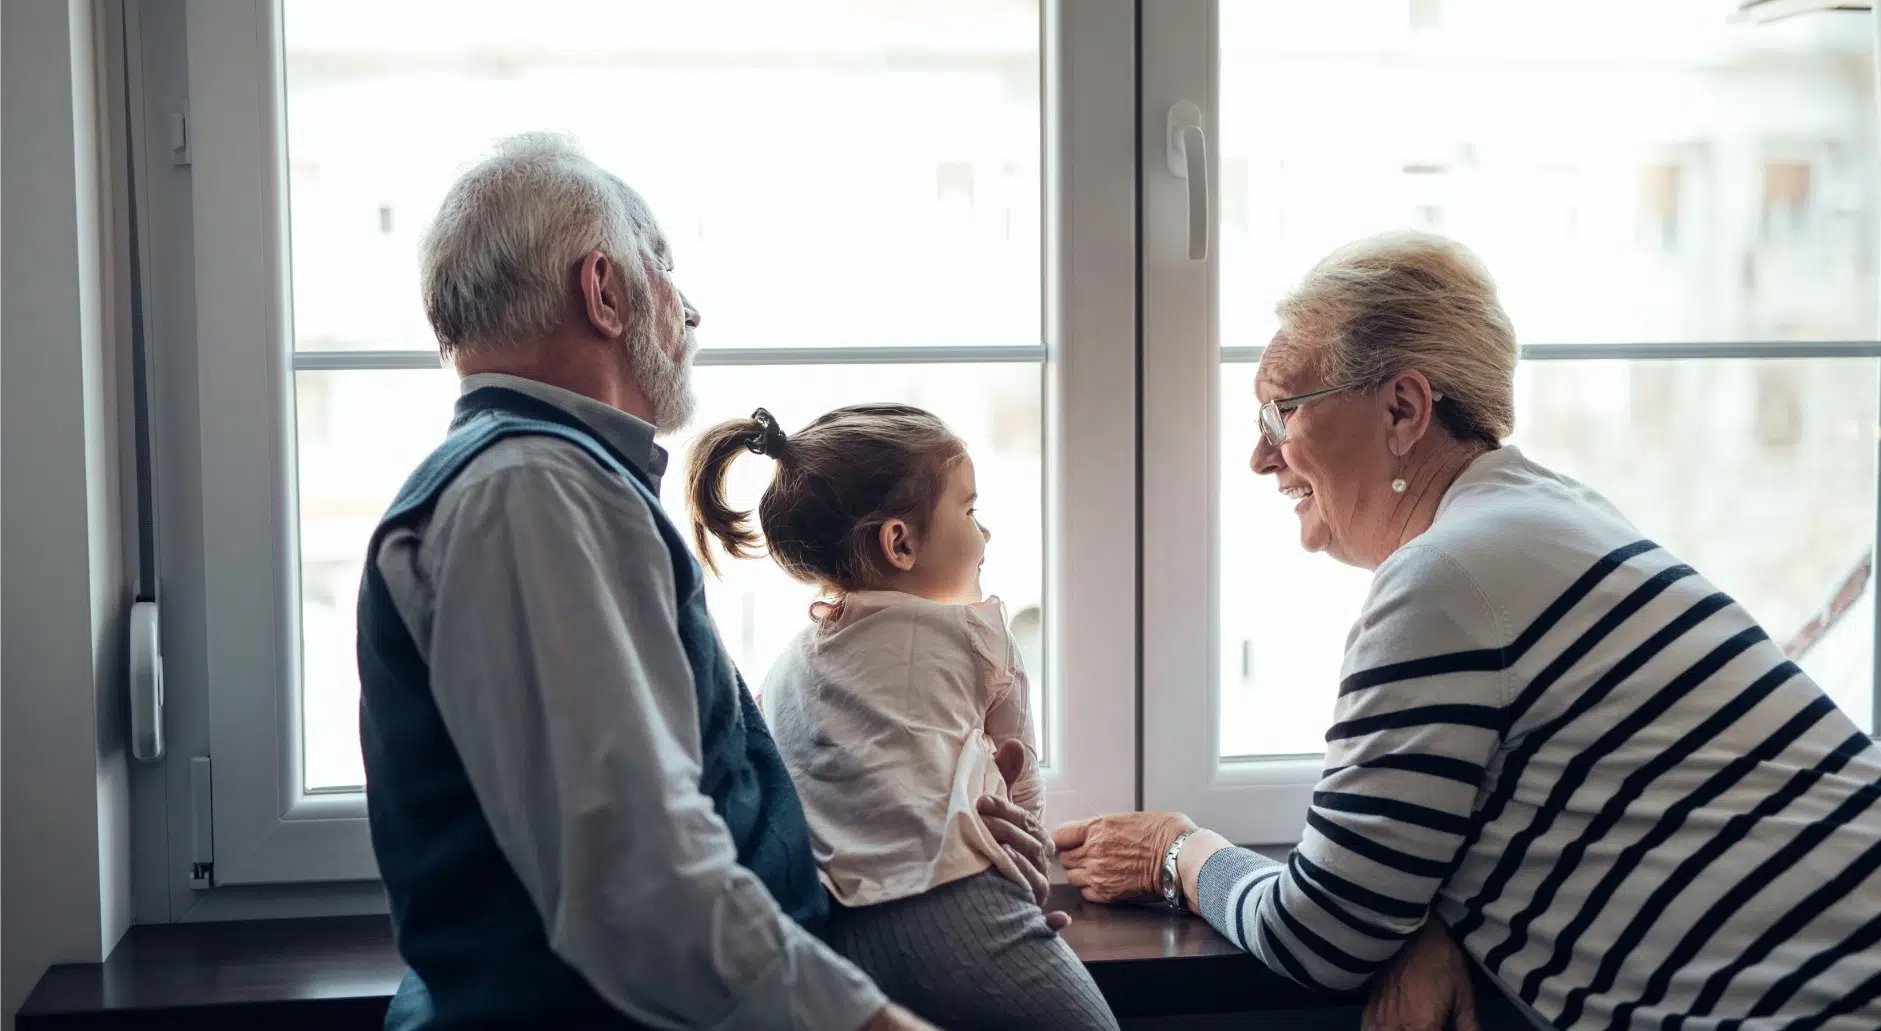 Two grandparents interacting with a grandchild while looking out a window